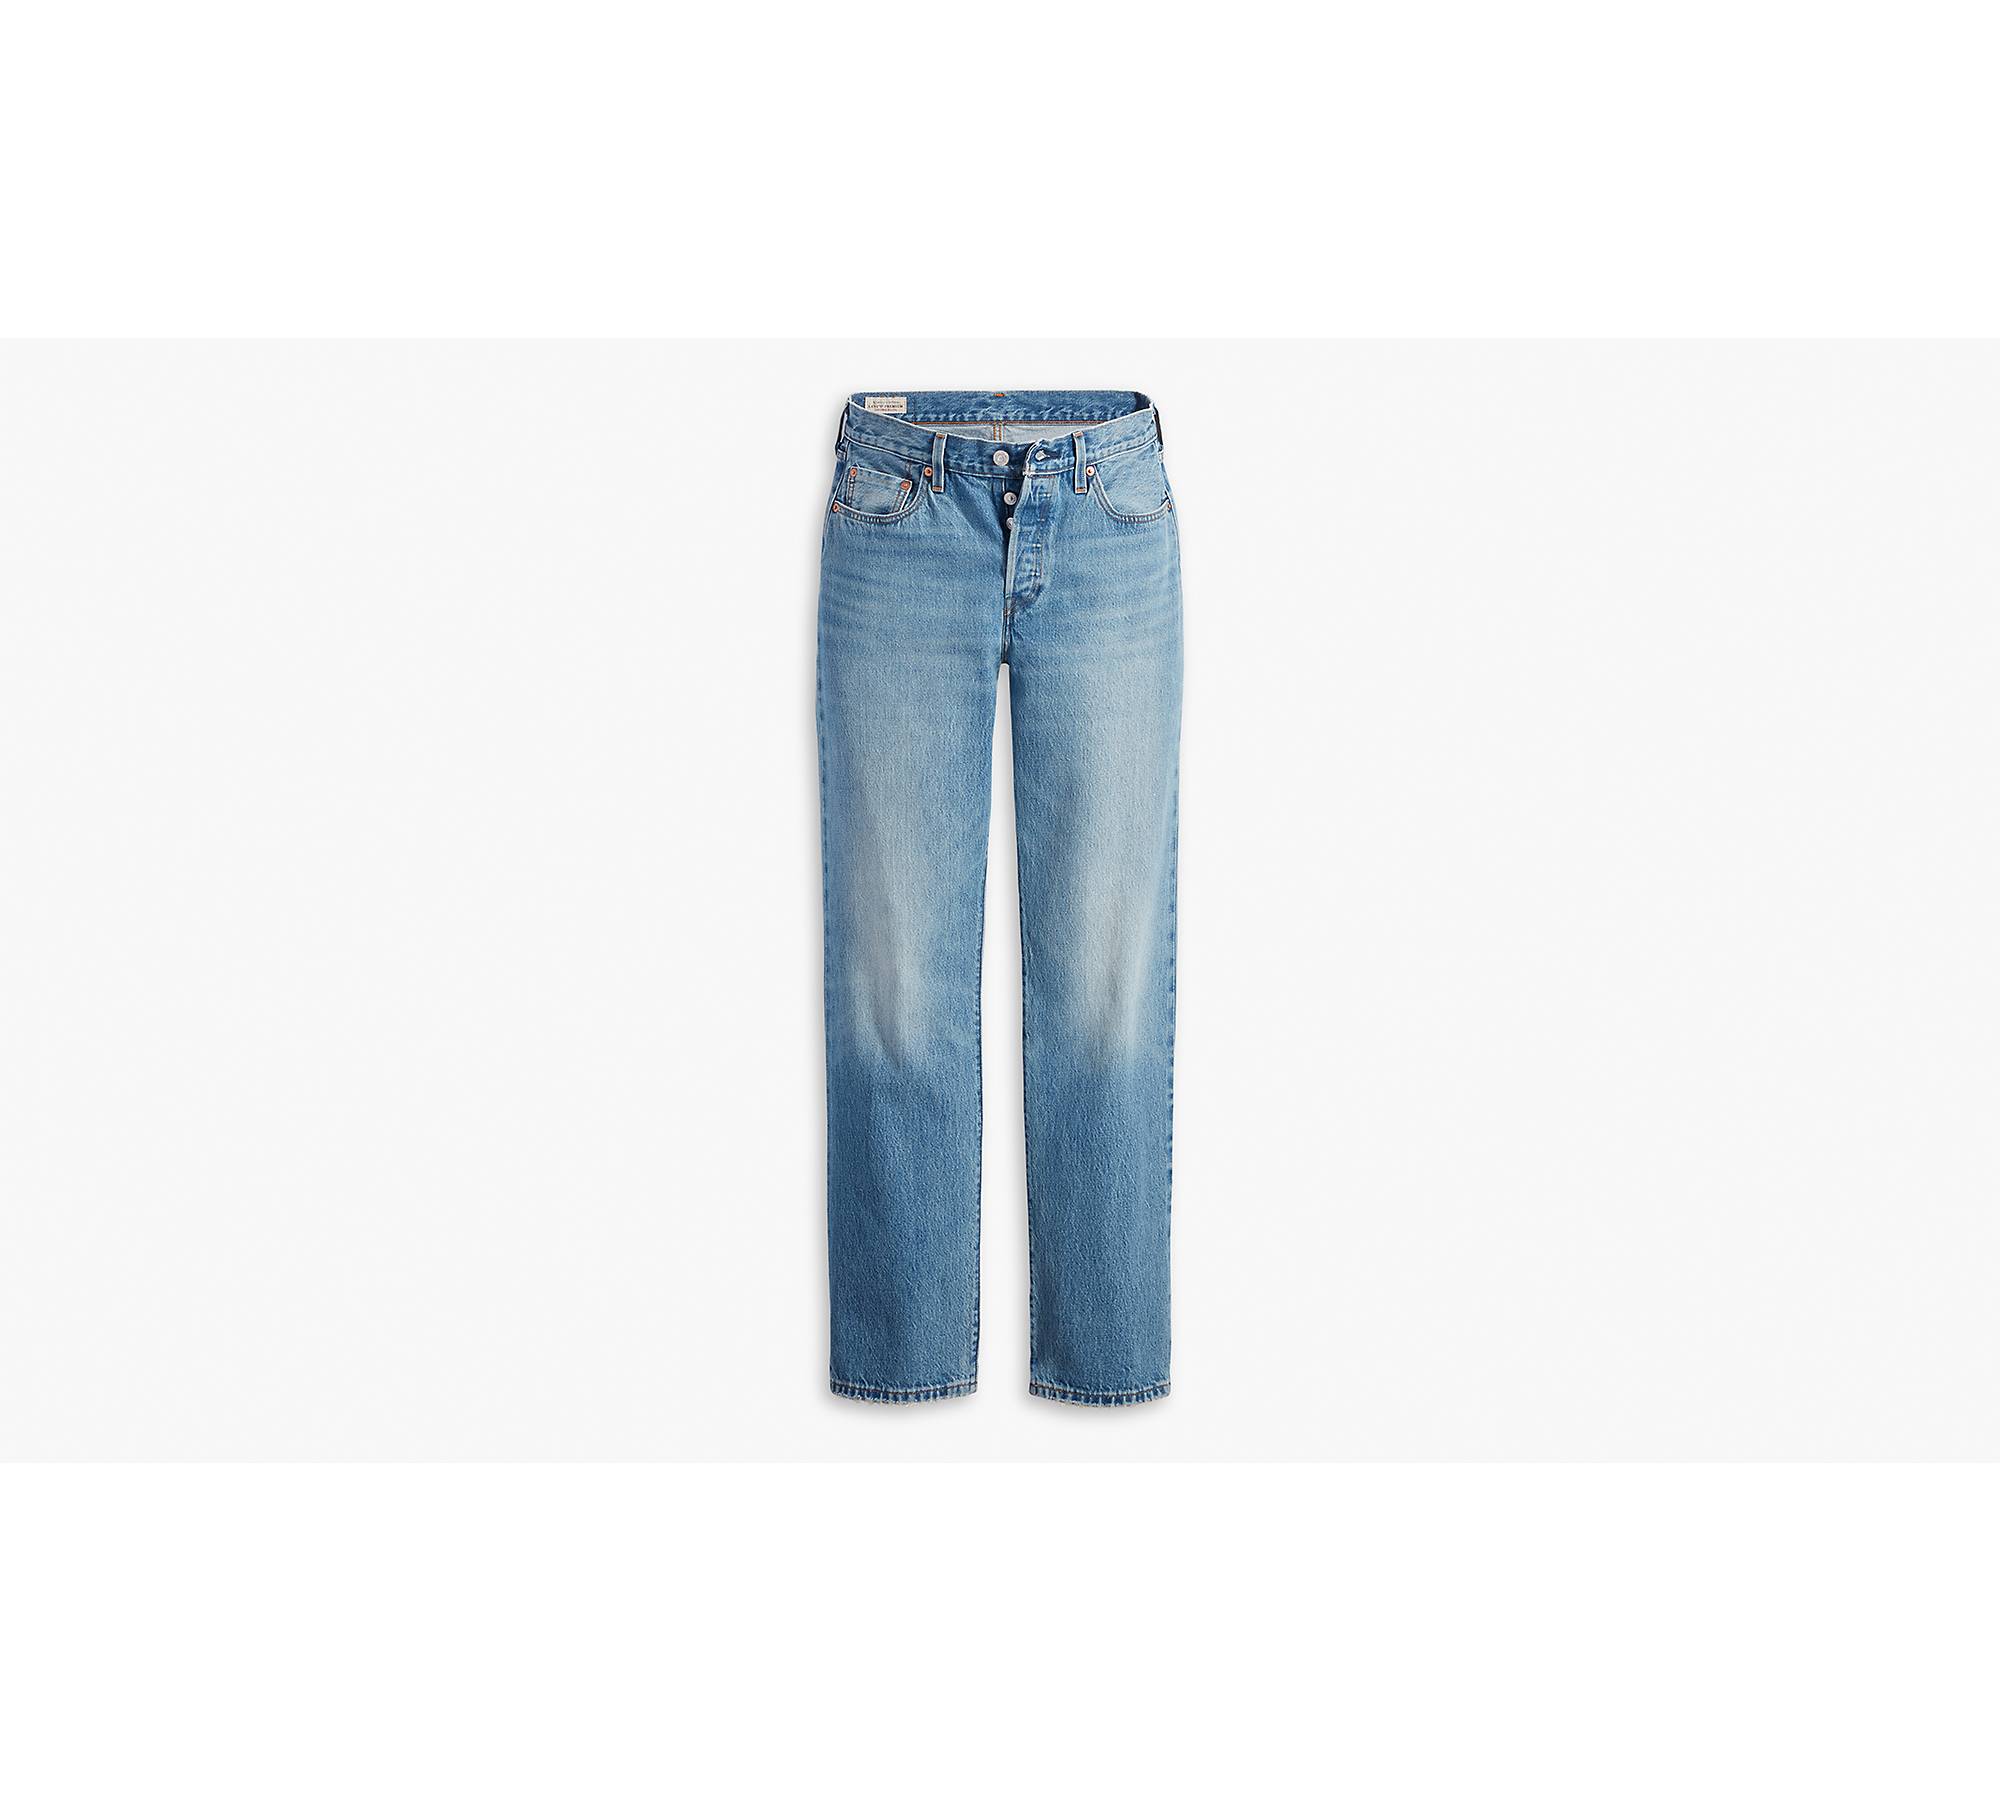 COBAIN HIGH WAISTED JEAN IN BLUE, JEANS